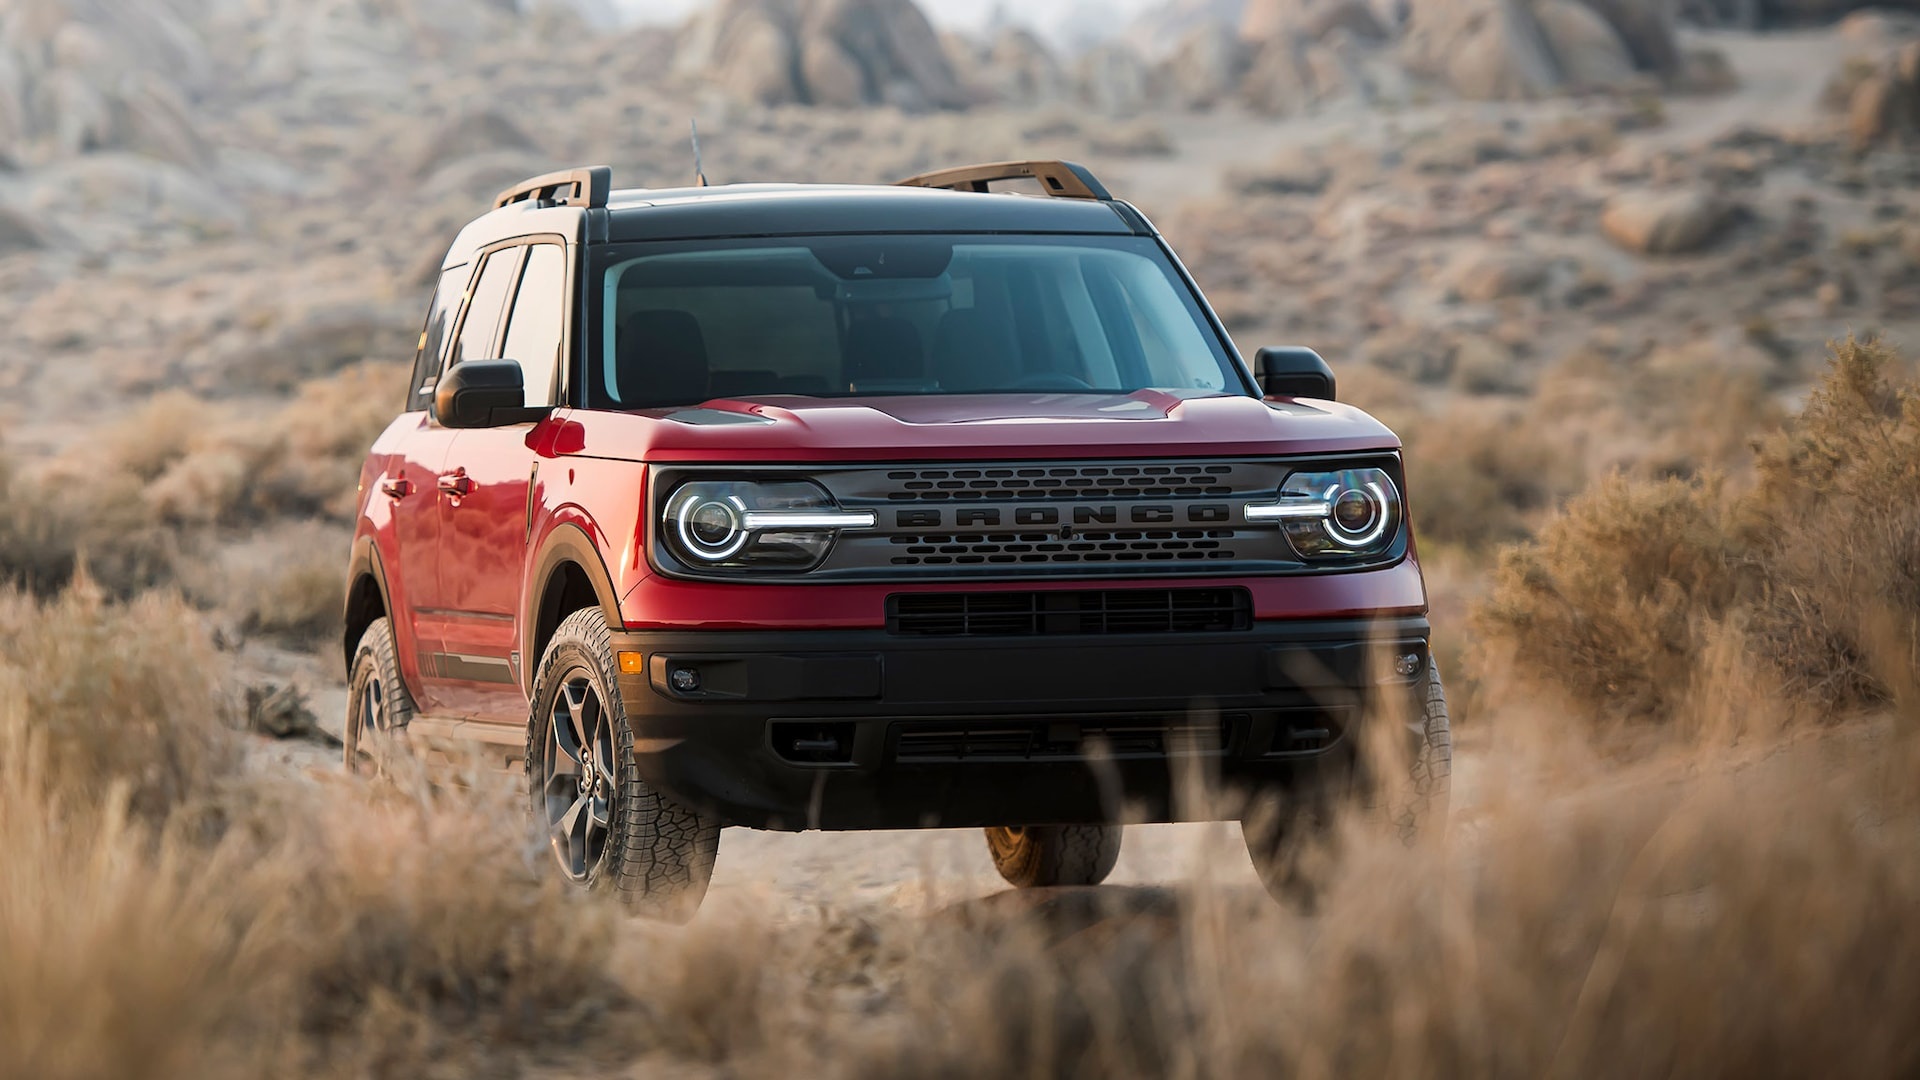 Ford Bronco: Extended Roof, Compact Sport Utility Vehicle, Powerful Front Engine, 2021. 1920x1080 Full HD Wallpaper.